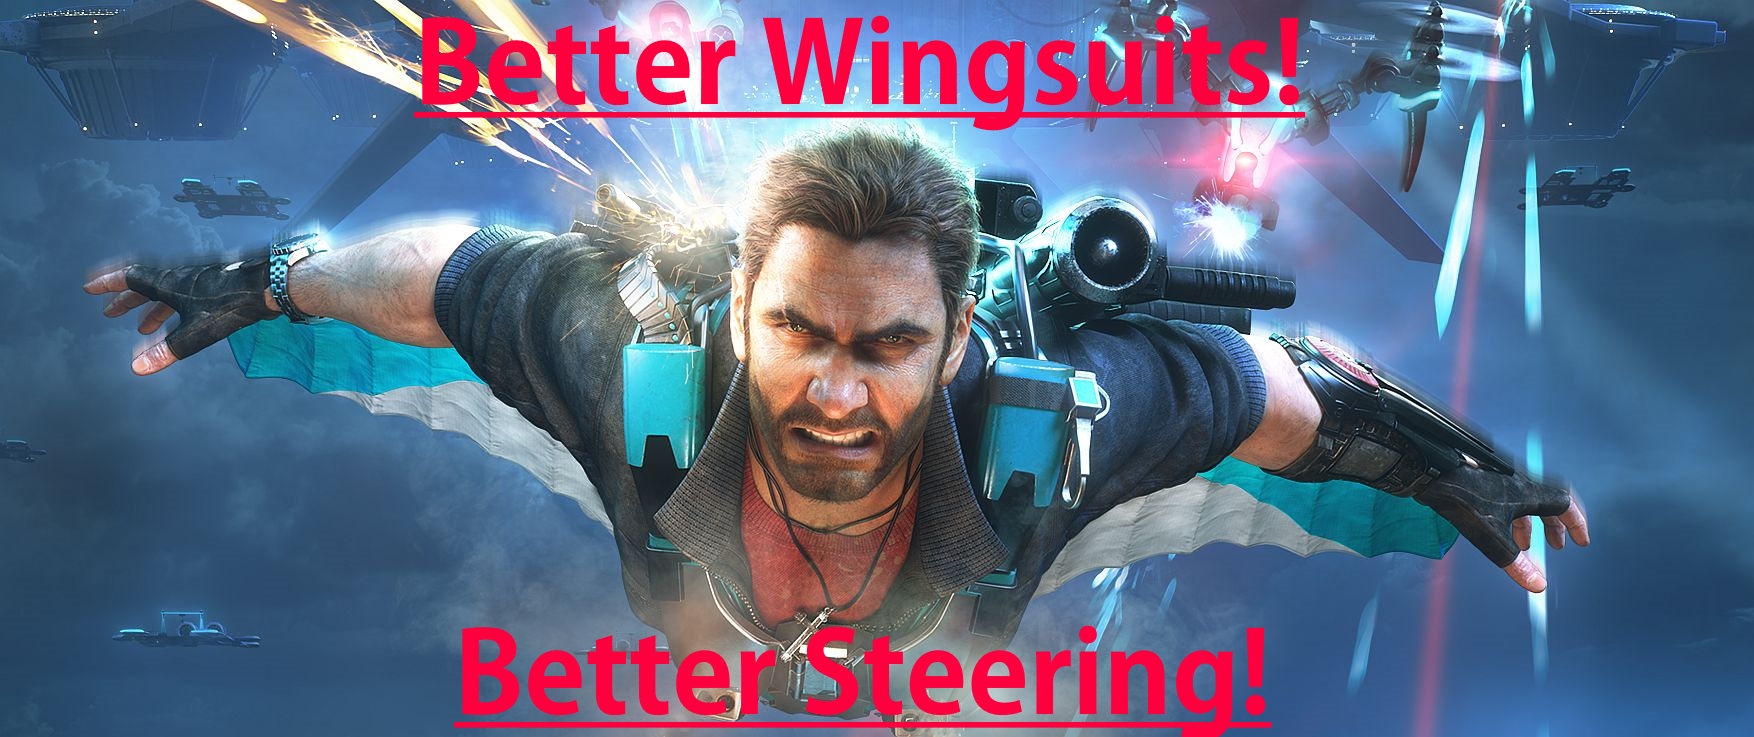 *UPDATED* Better Wingsuits